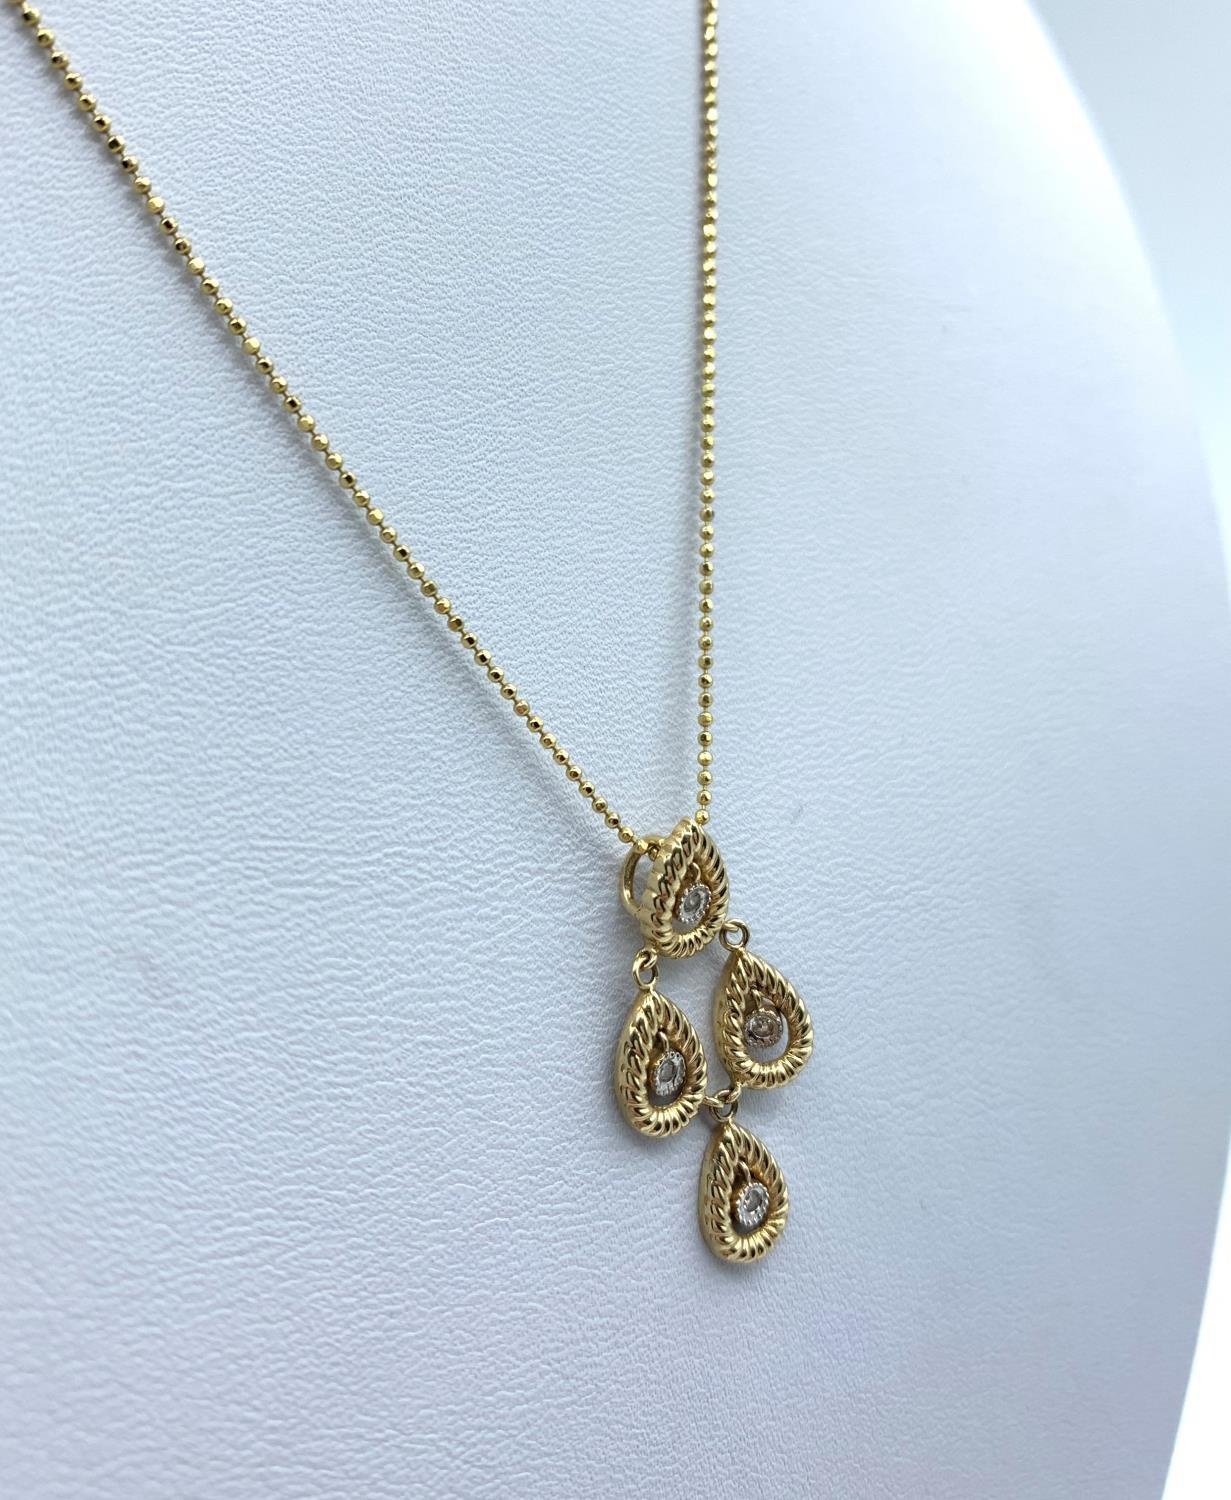 Diamond Drop Pendant in 18K Gold on a 9K Gold Chain, weight 3.1g and 36cm long chain - Image 2 of 4